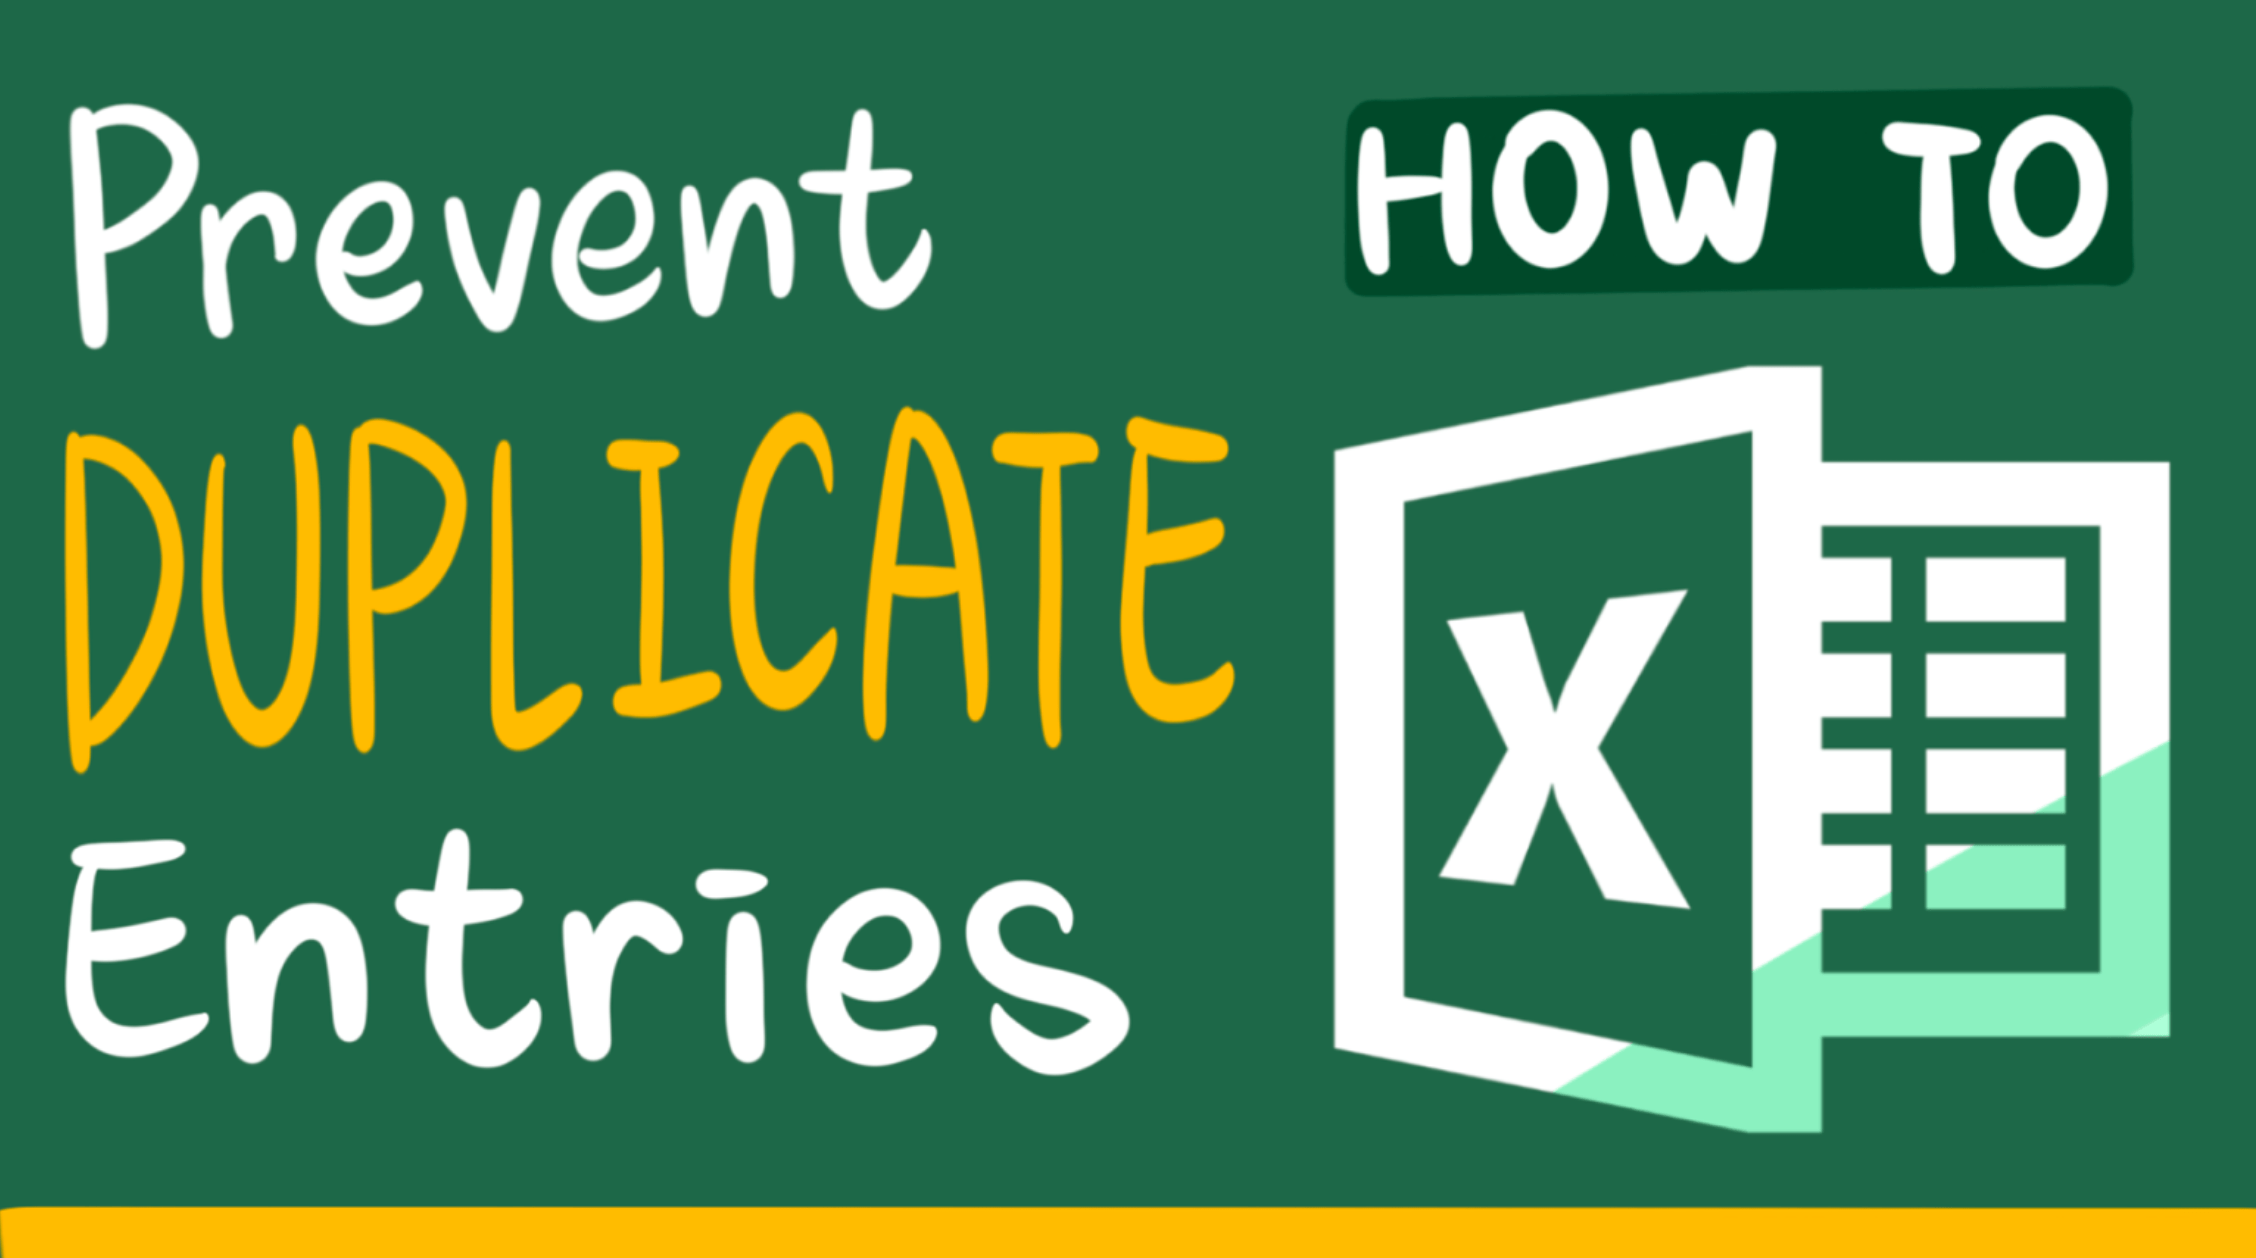 How to prevent duplicate entries in Excel?